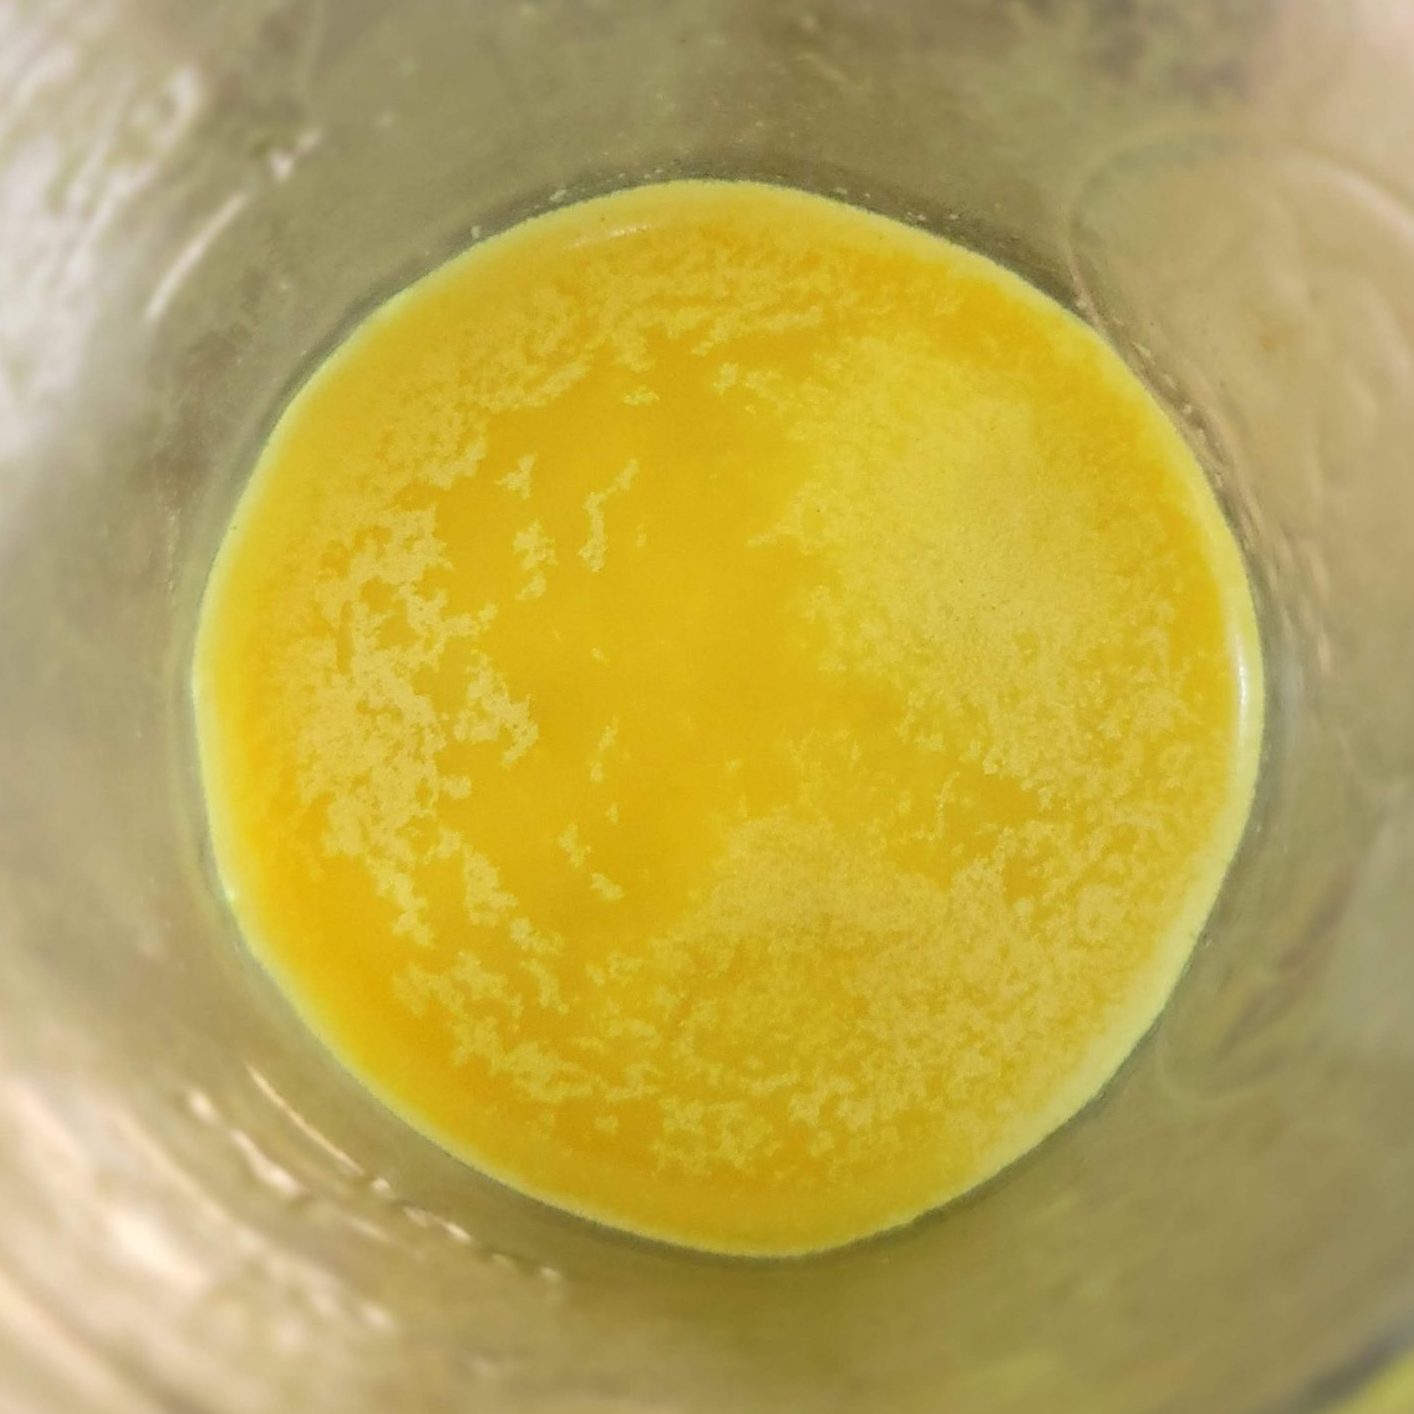 Vegan Spiced Clarified Butter (inspired by Nit’ir Qibe)